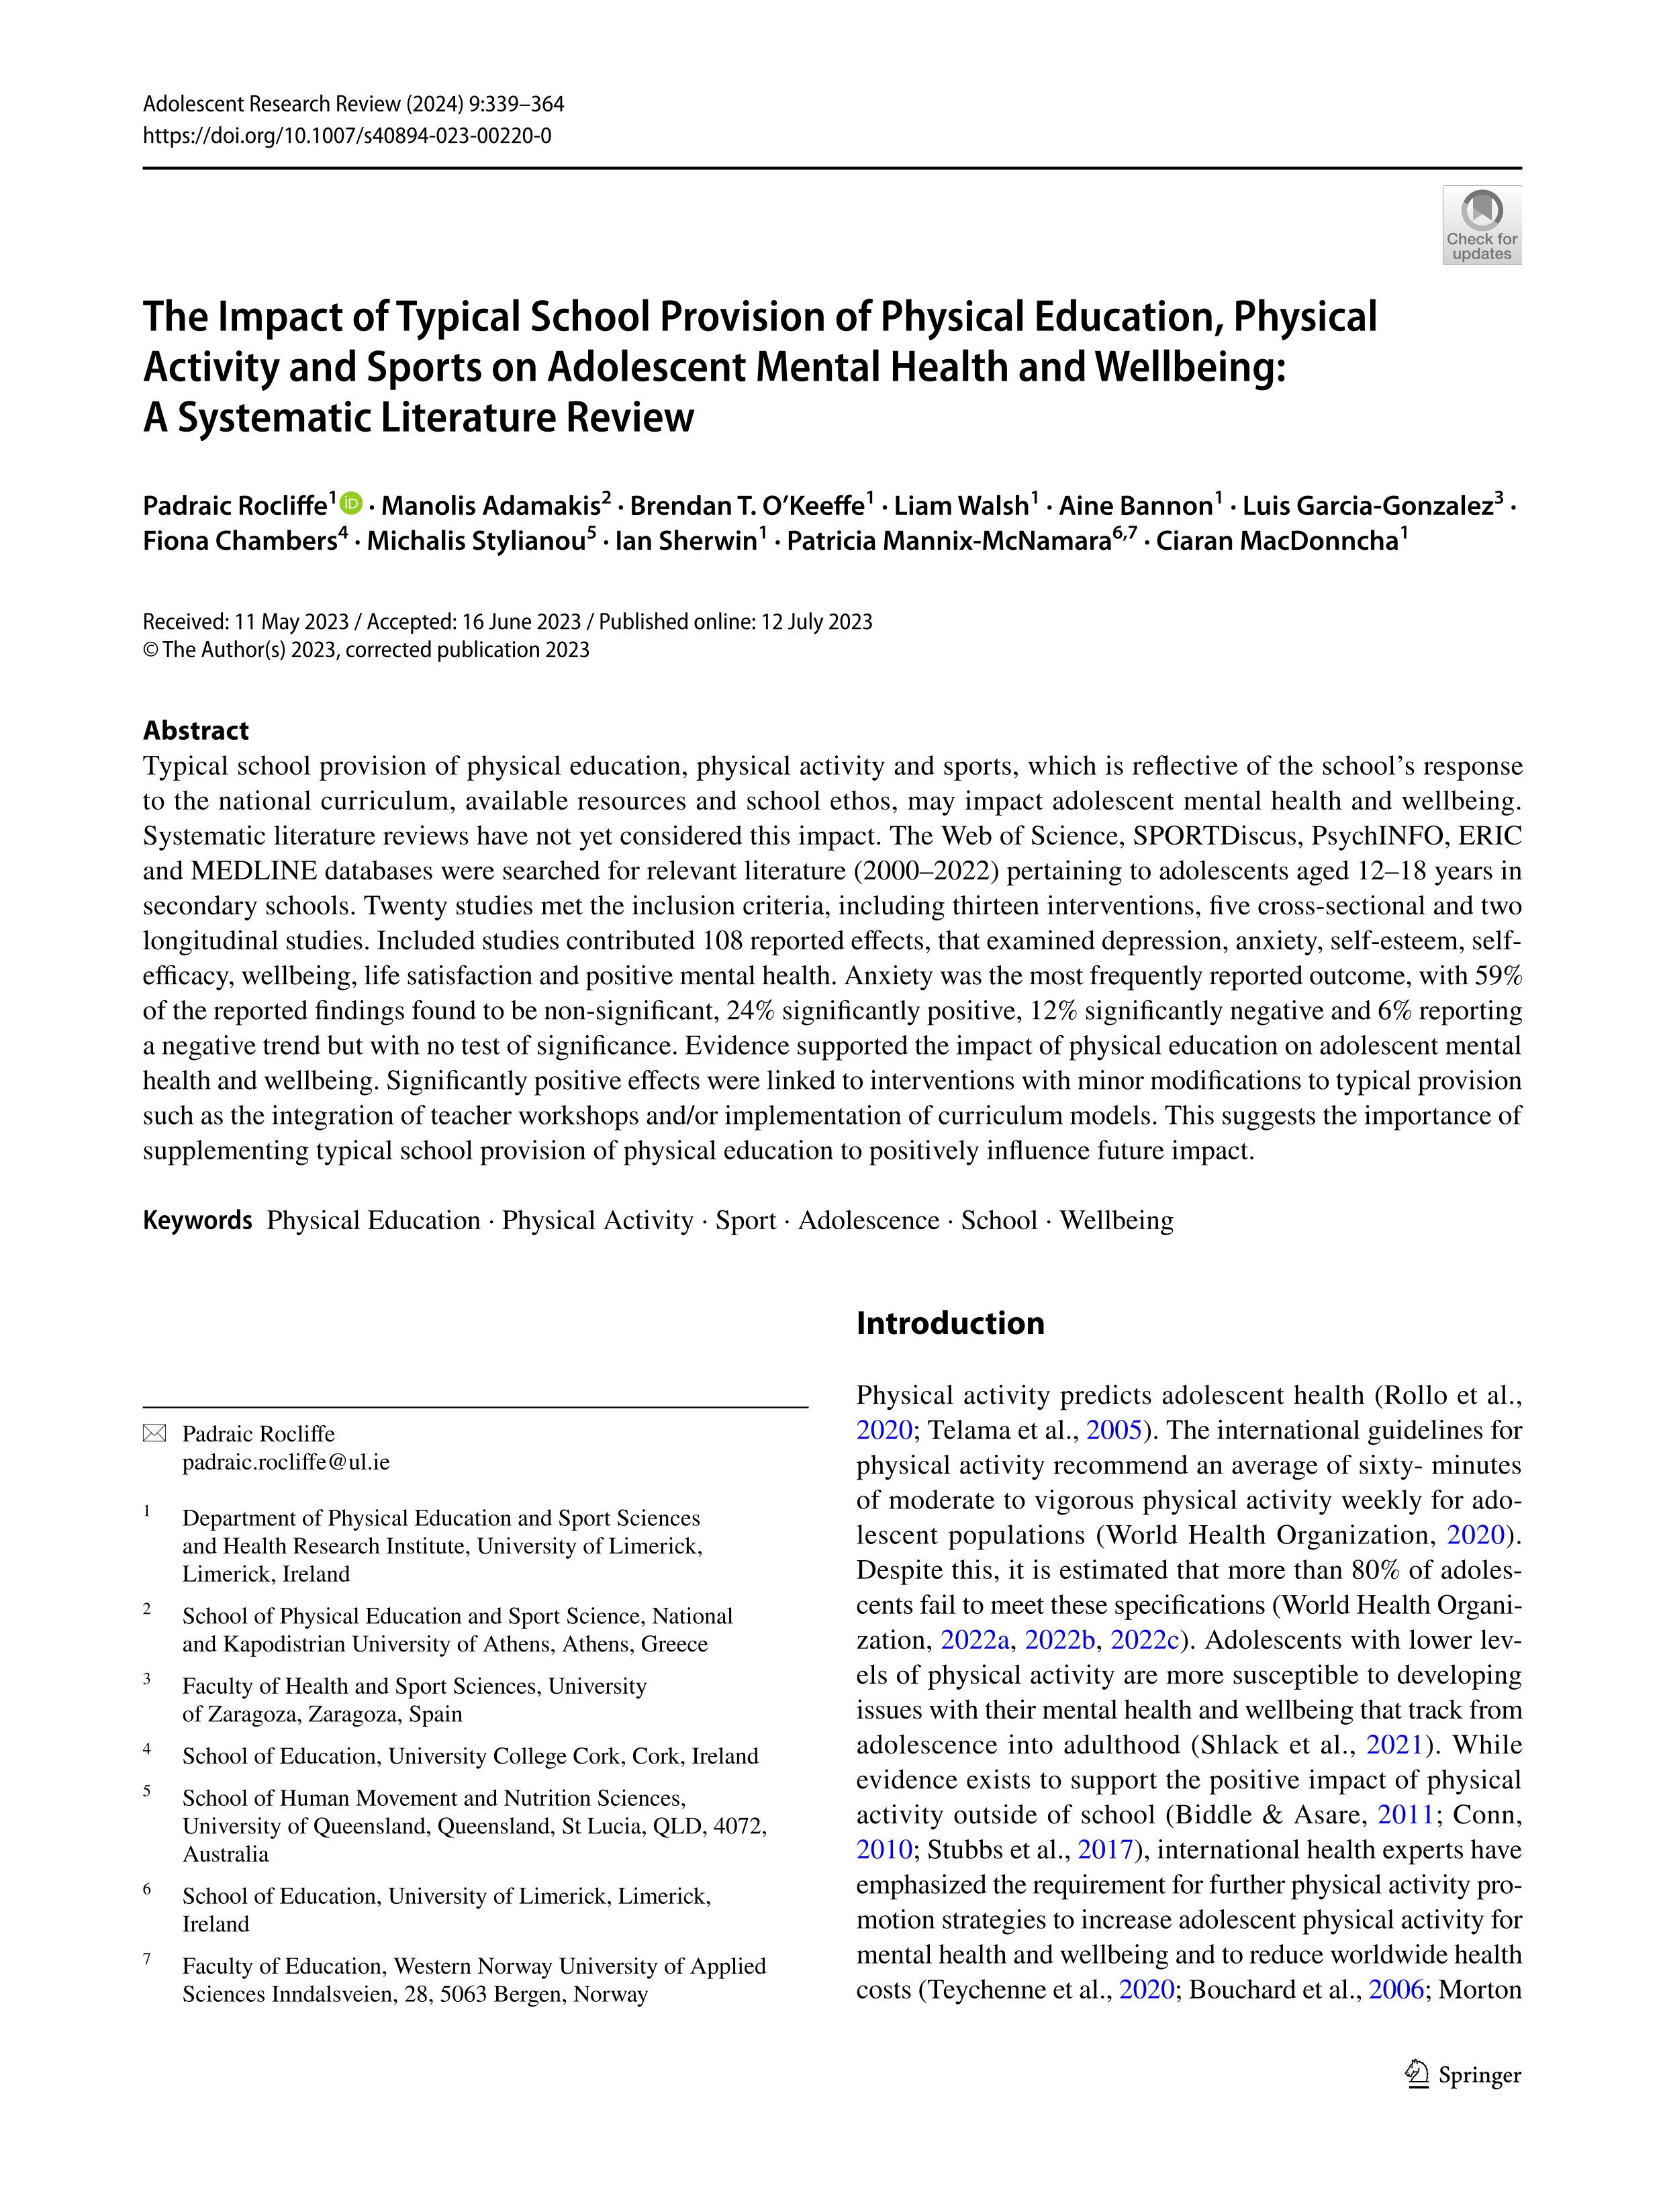 The Impact of Typical School Provision of Physical Education, Physical Activity and Sports on Adolescent Mental Health and Wellbeing: A Systematic Literature Review